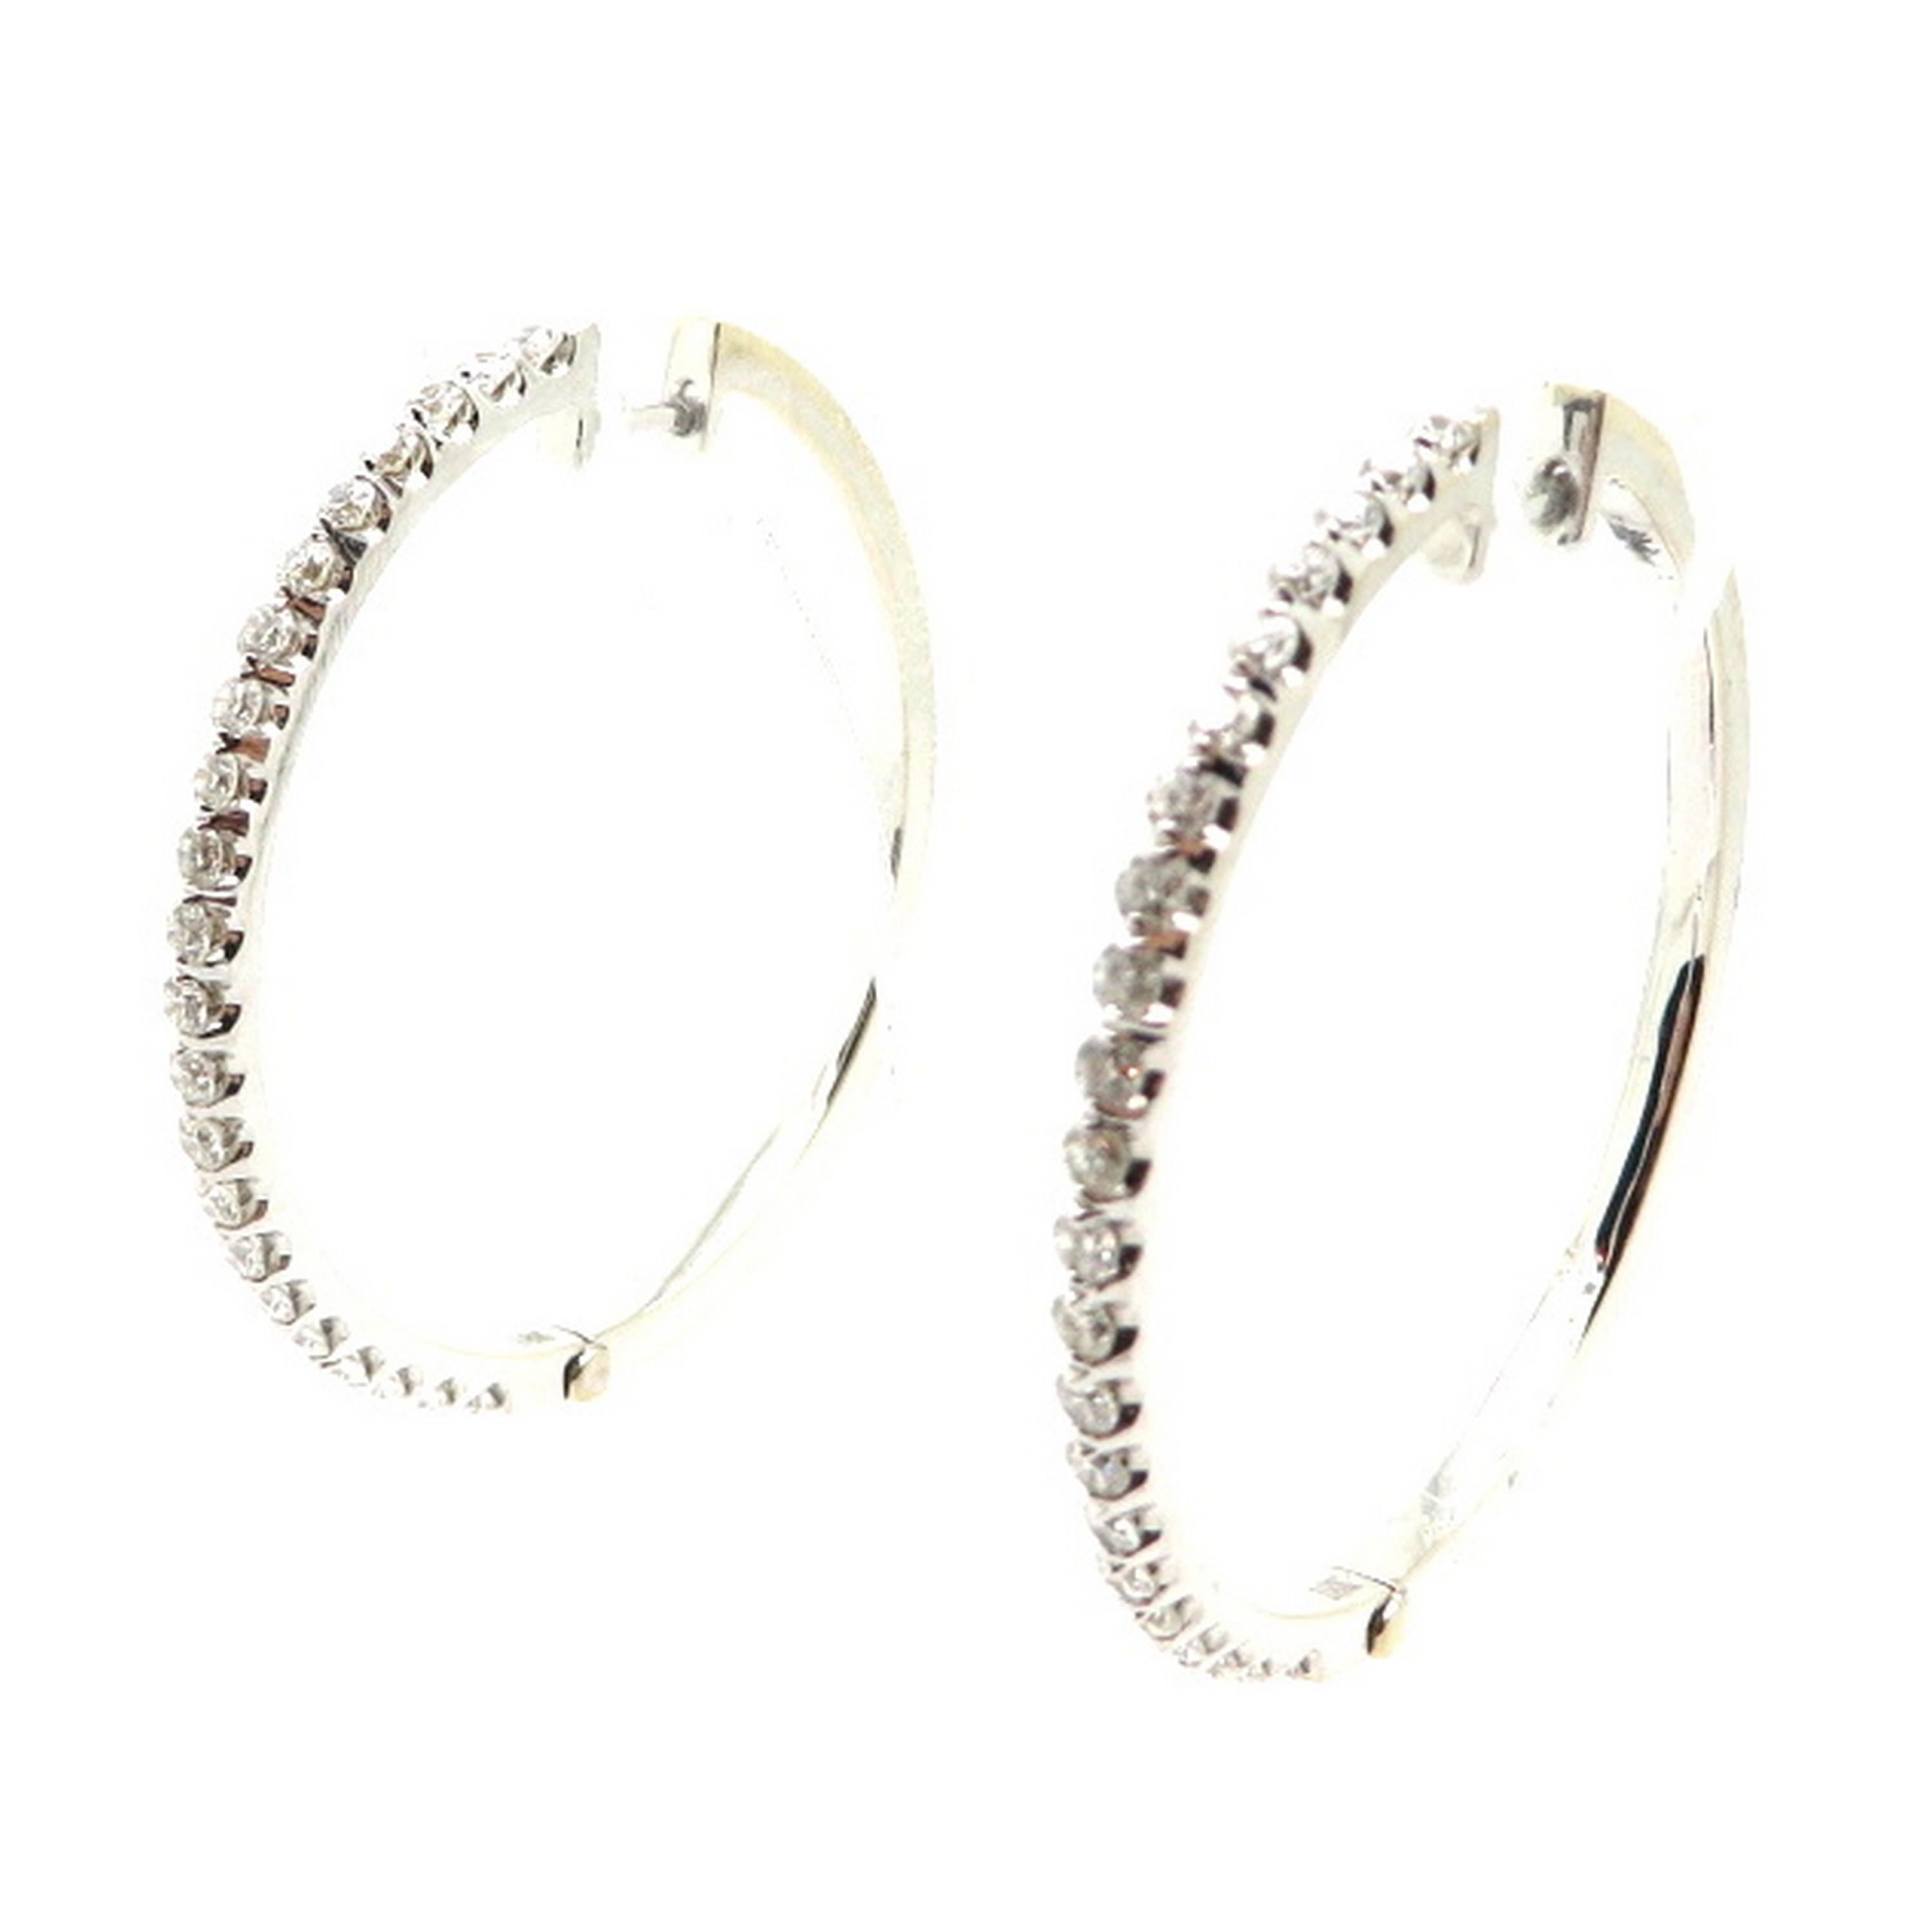 Estate 18 Karat White Gold Round Diamond Fashion Hoop Earrings In Excellent Condition For Sale In Scottsdale, AZ